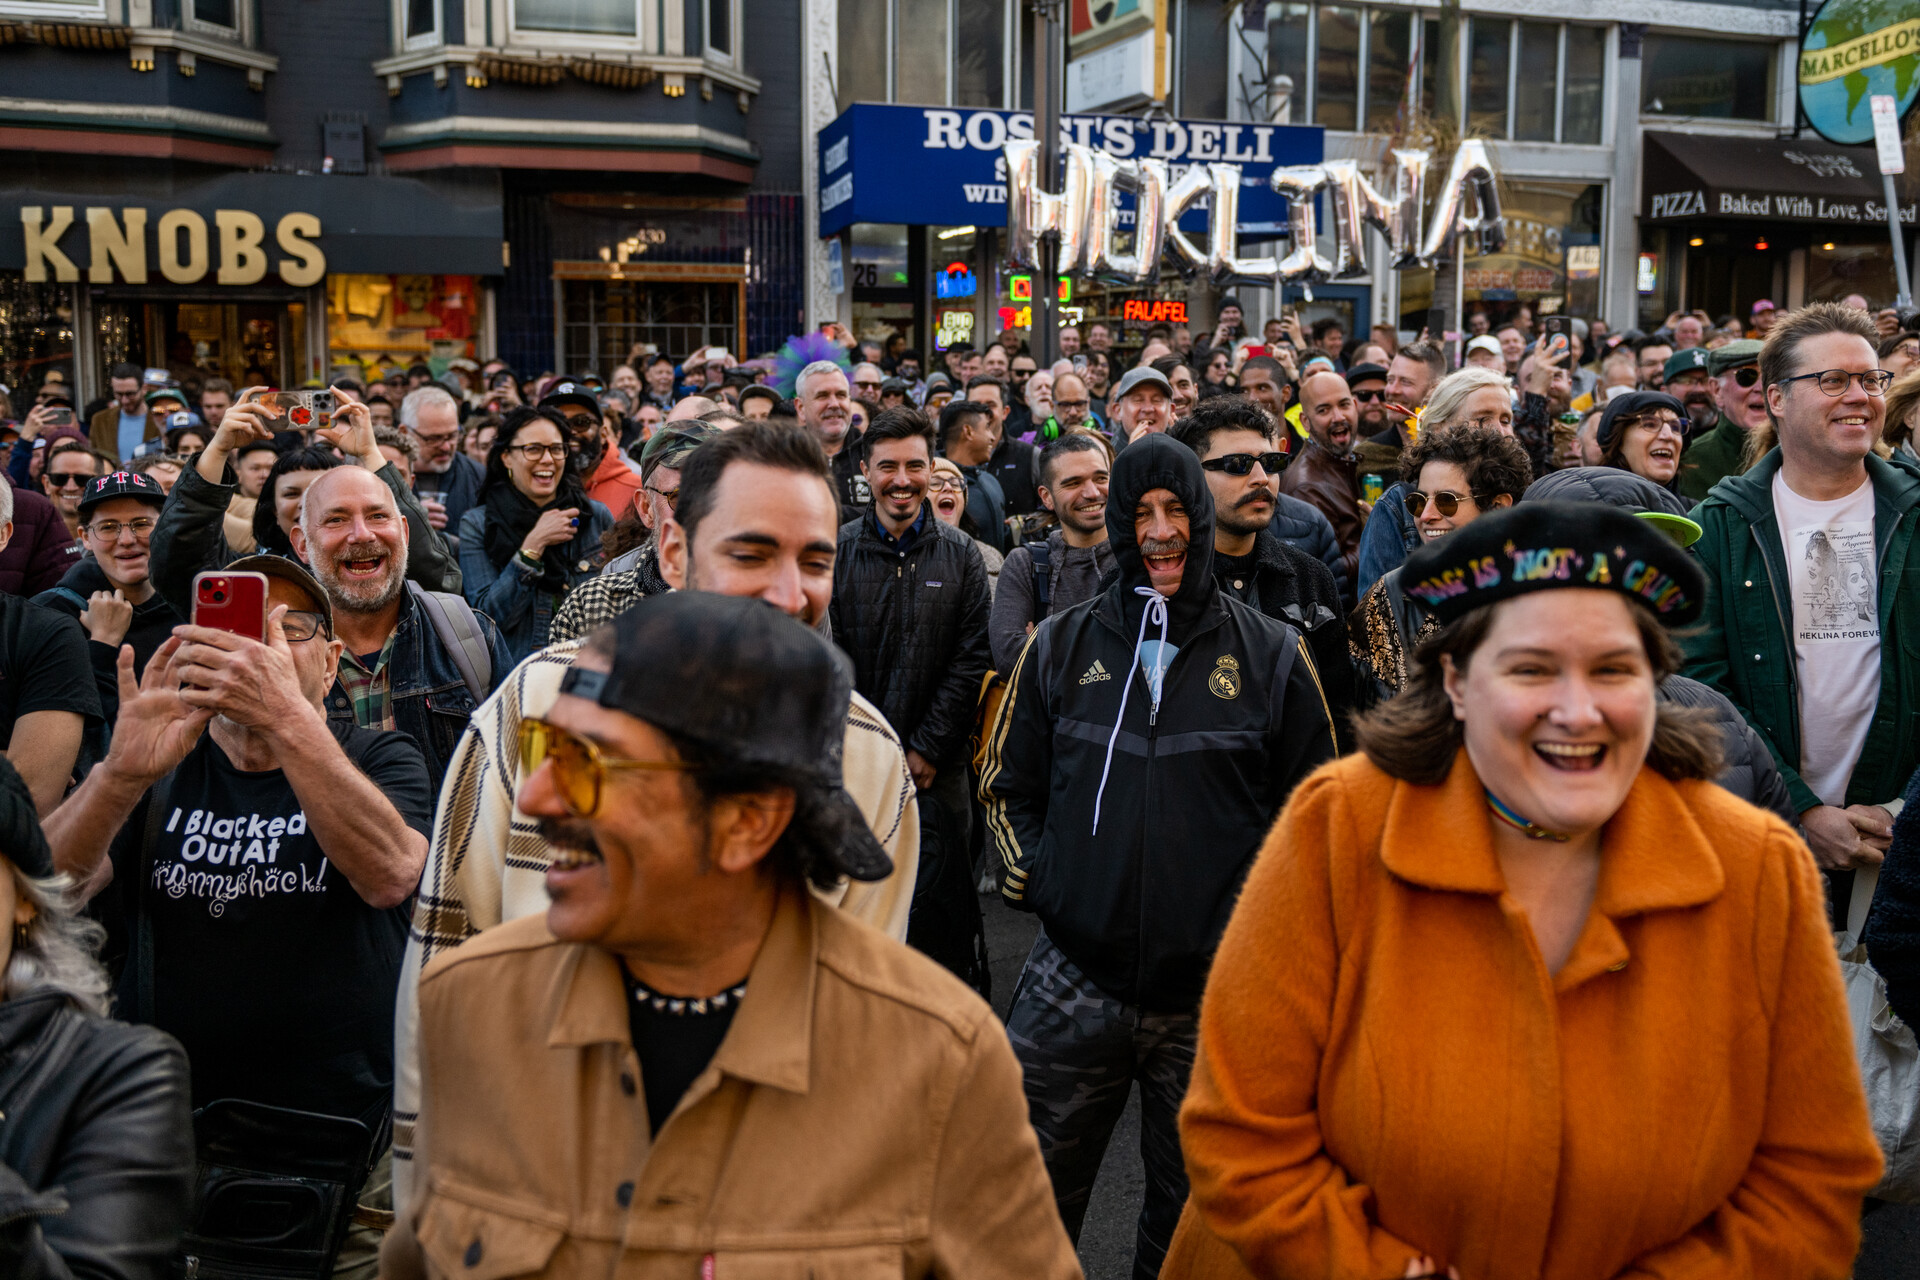 A crowd of hundreds, of all ages, stands outside on San Francisco's Castro Street and laughs, many with smiles on their faces. In the background, there are balloons in the shape of the letters that spell out "Heklina."